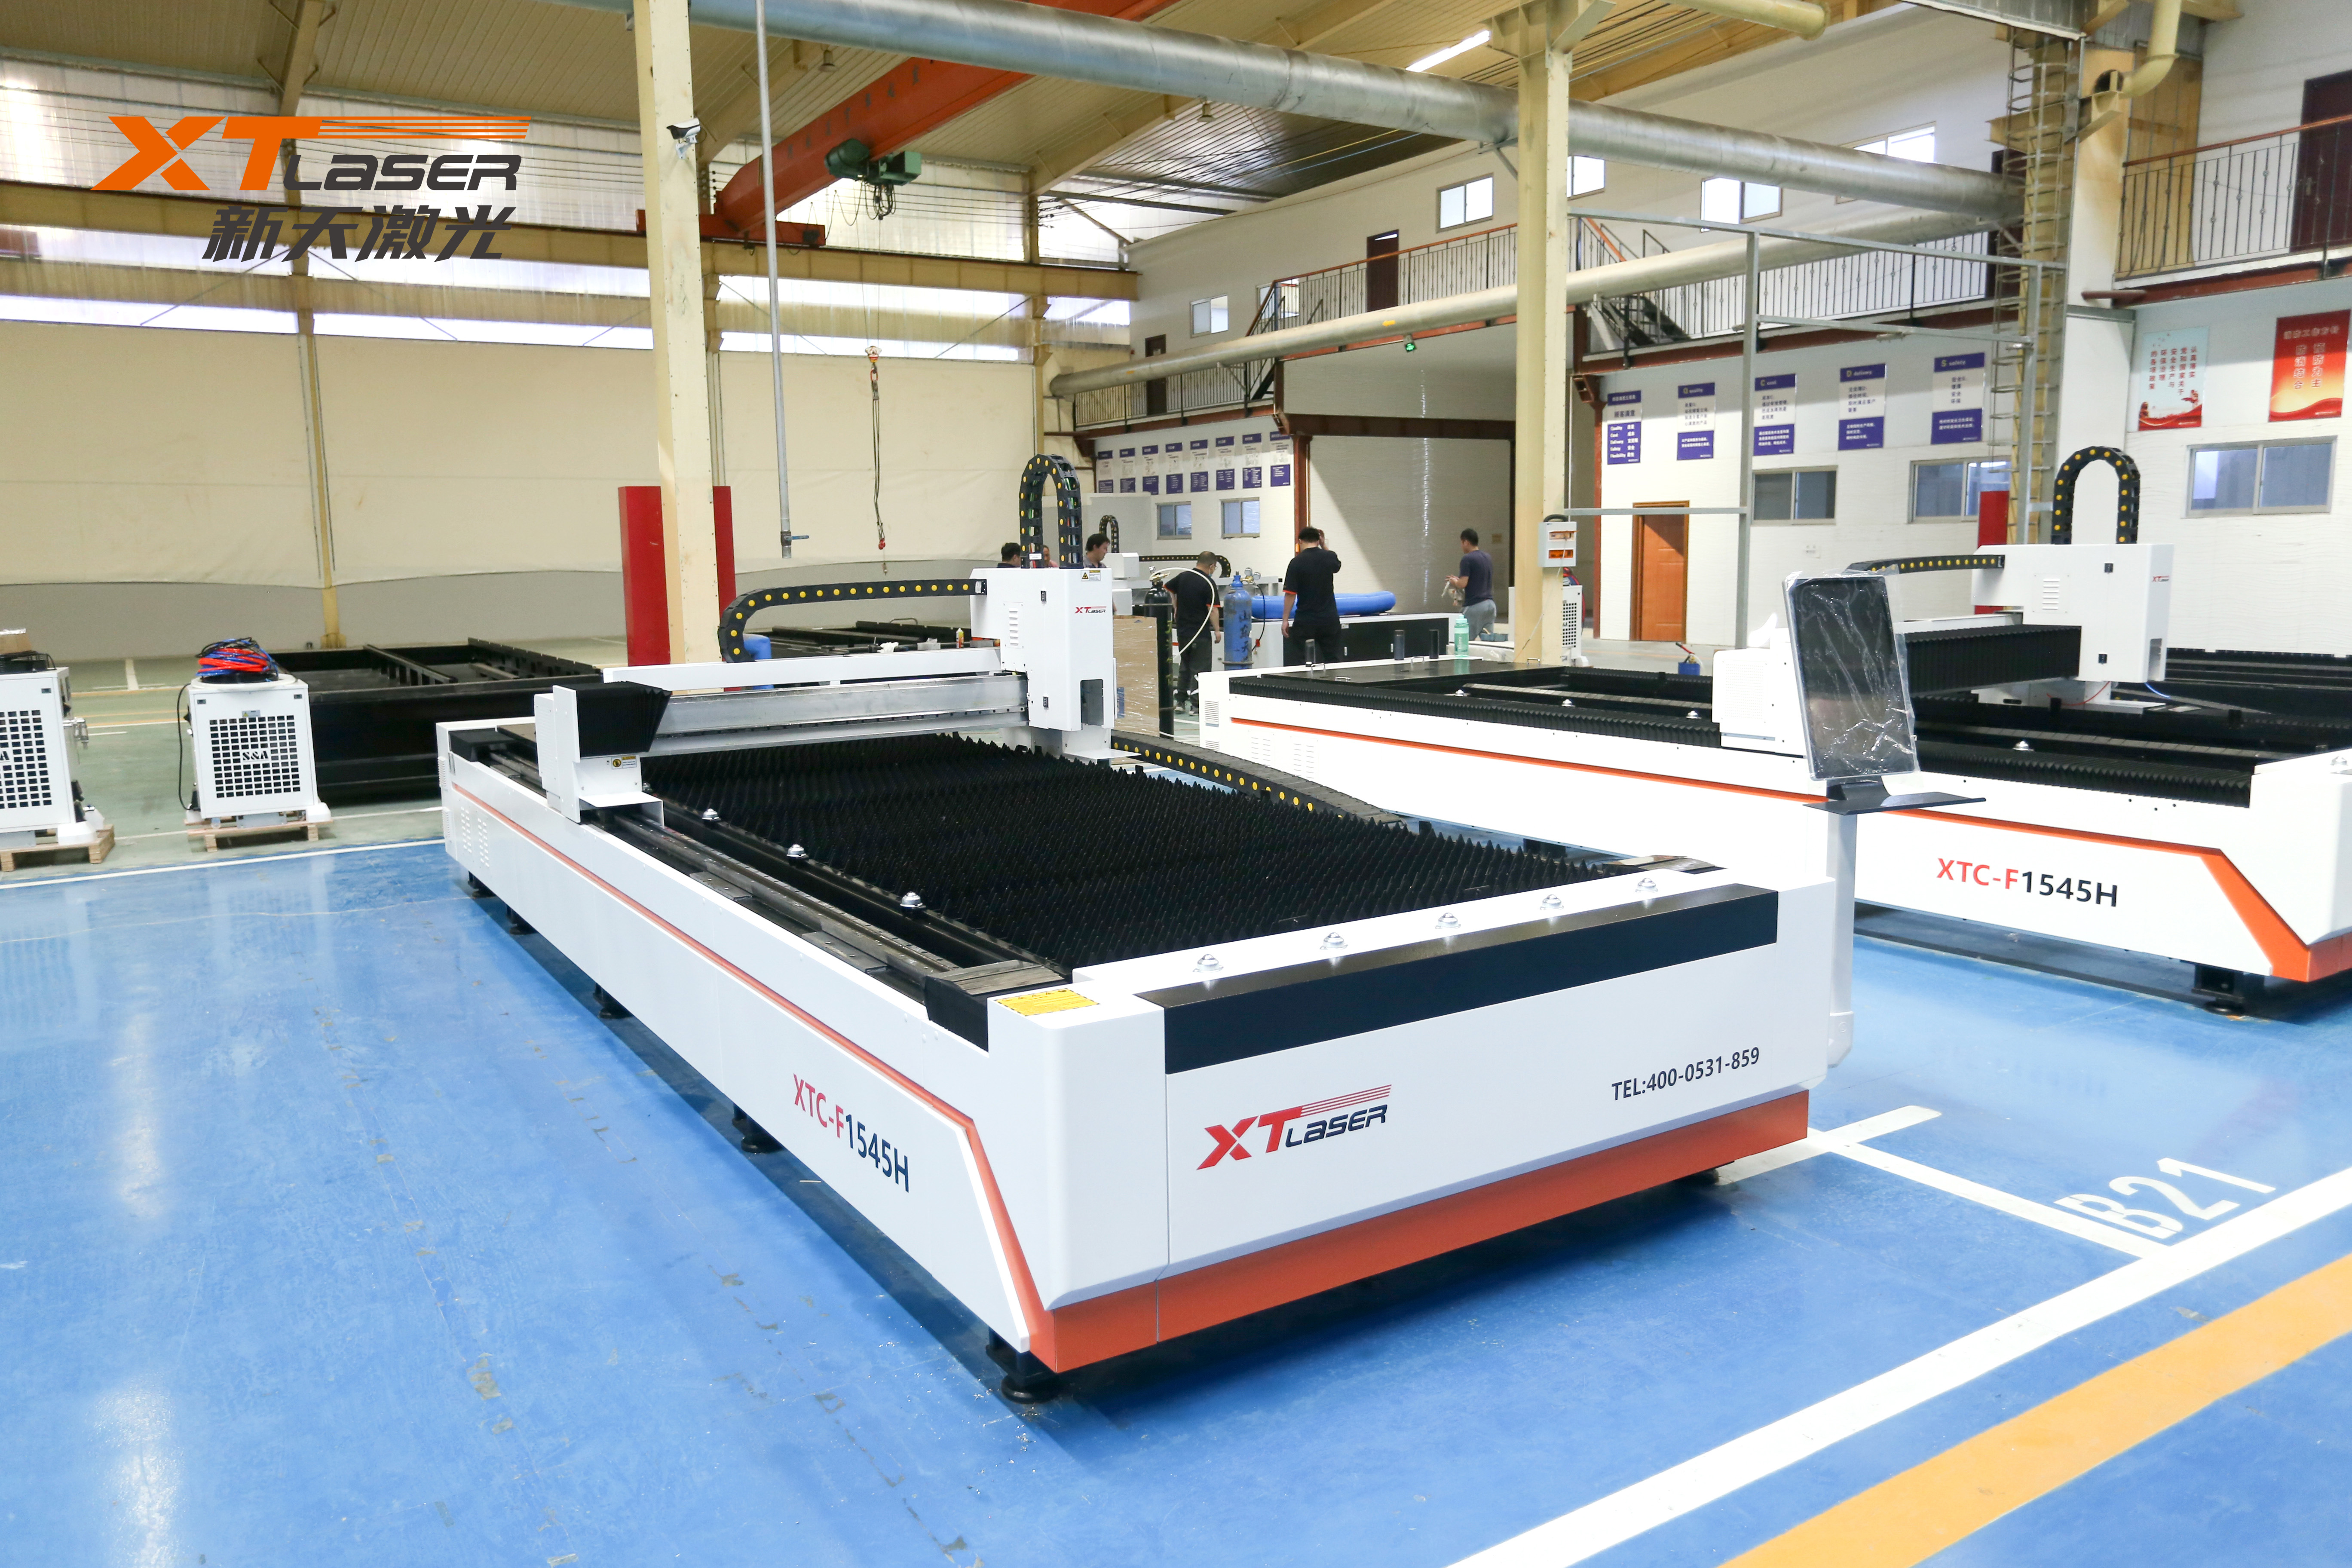 Laser cutting machines have become the 